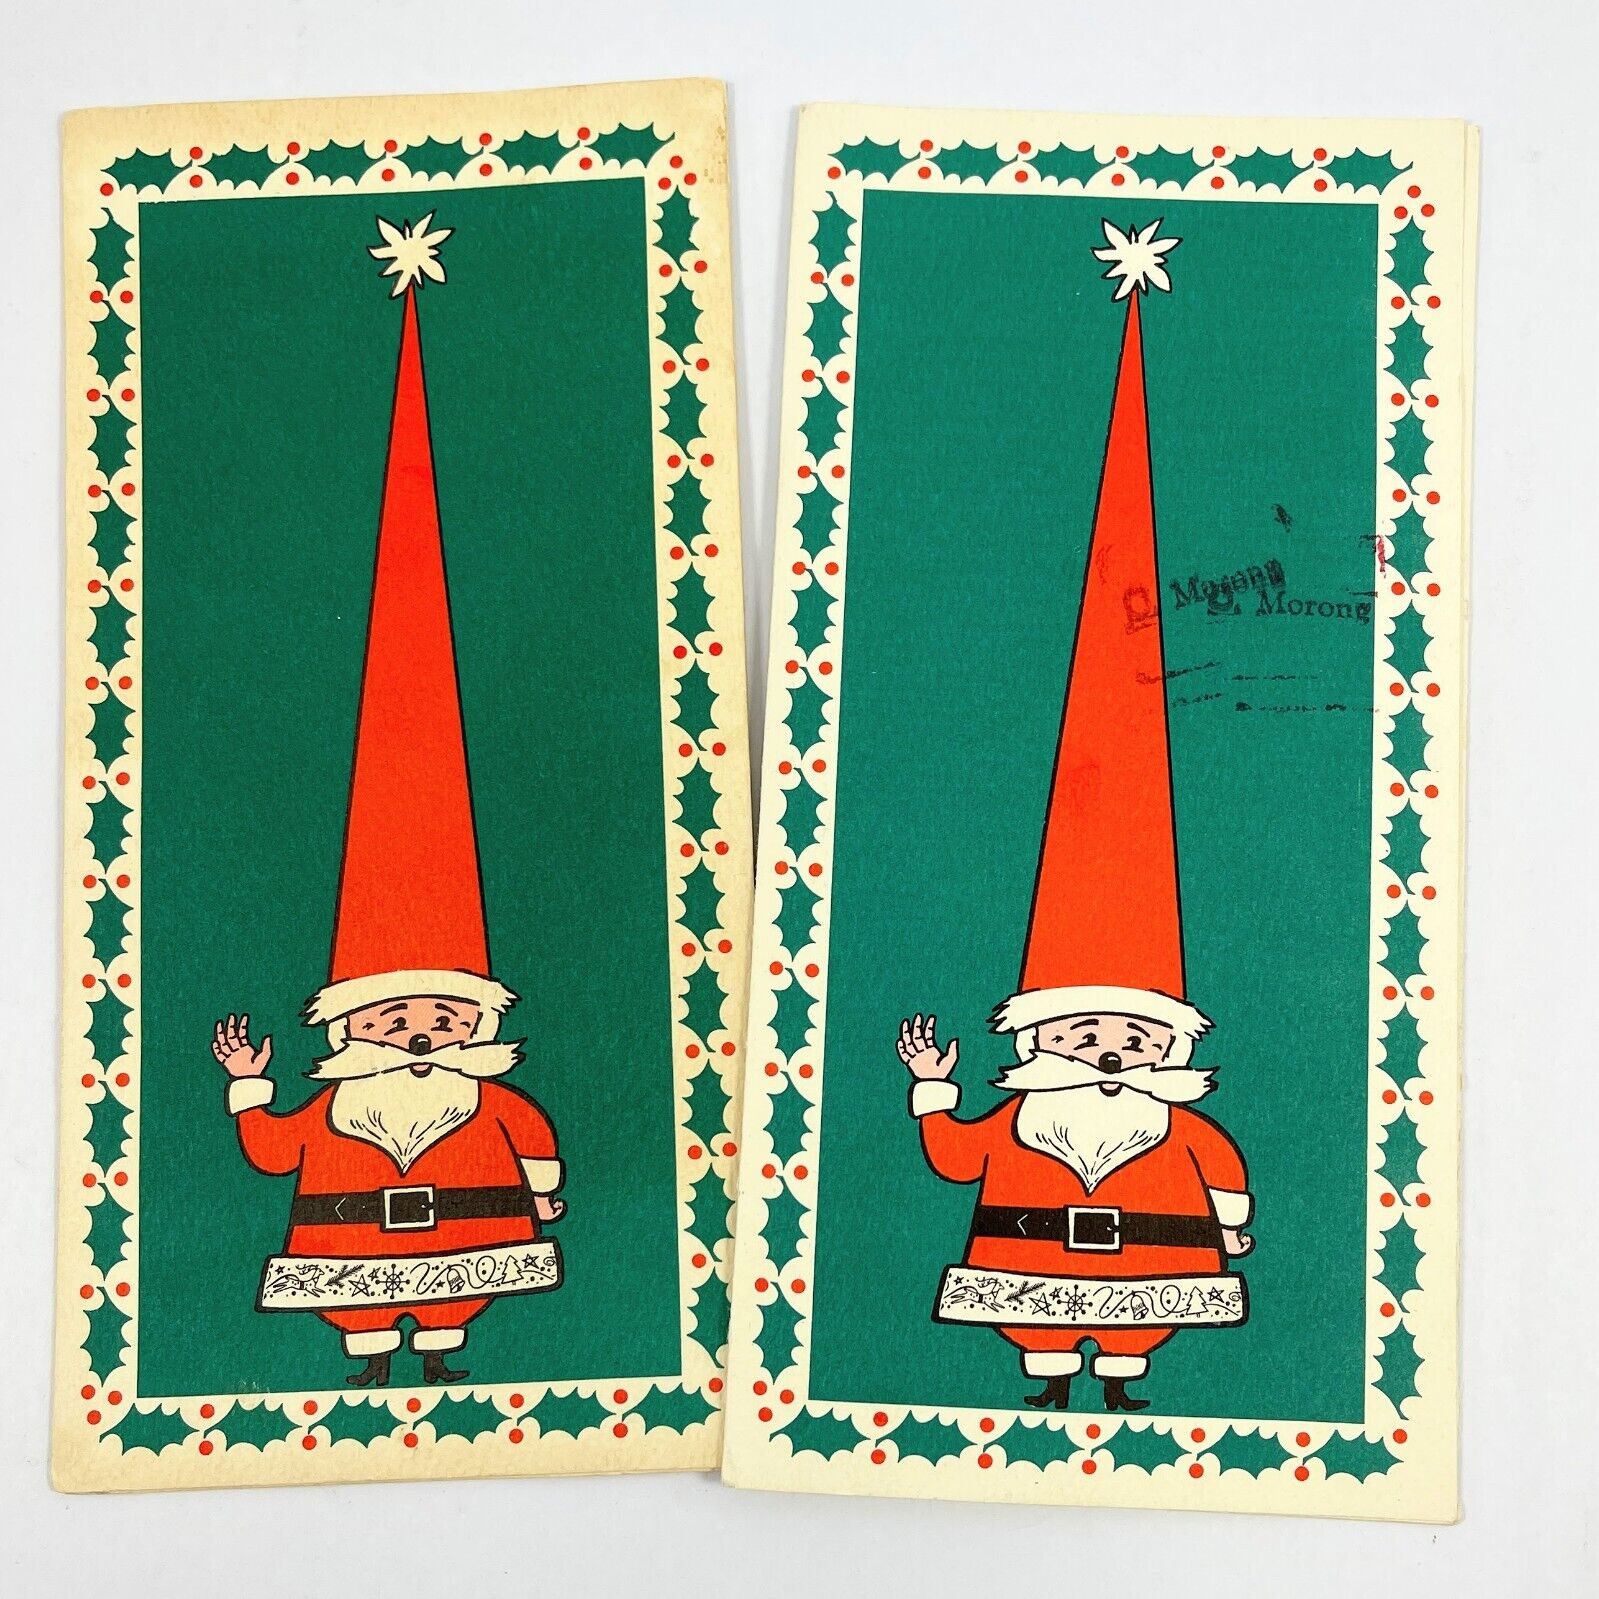 Department Store Photos with Santa Claus 1968 Lot of 2